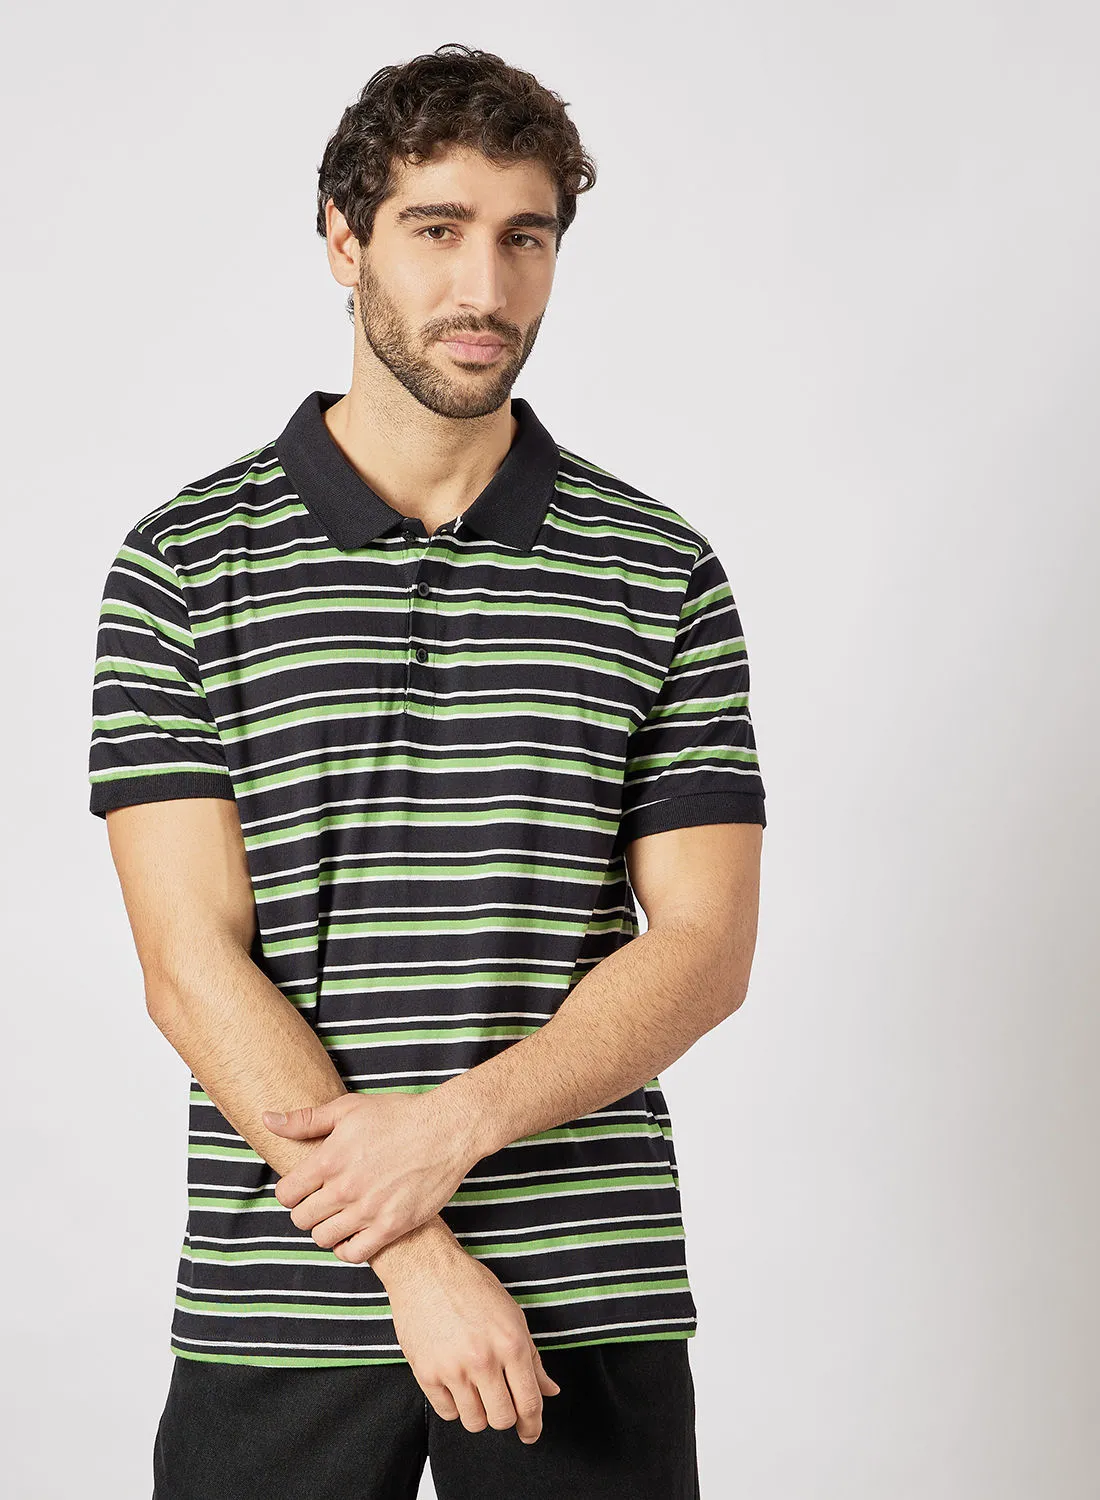 Noon East Men's Basic Casual Striped Polo T-shirt Black